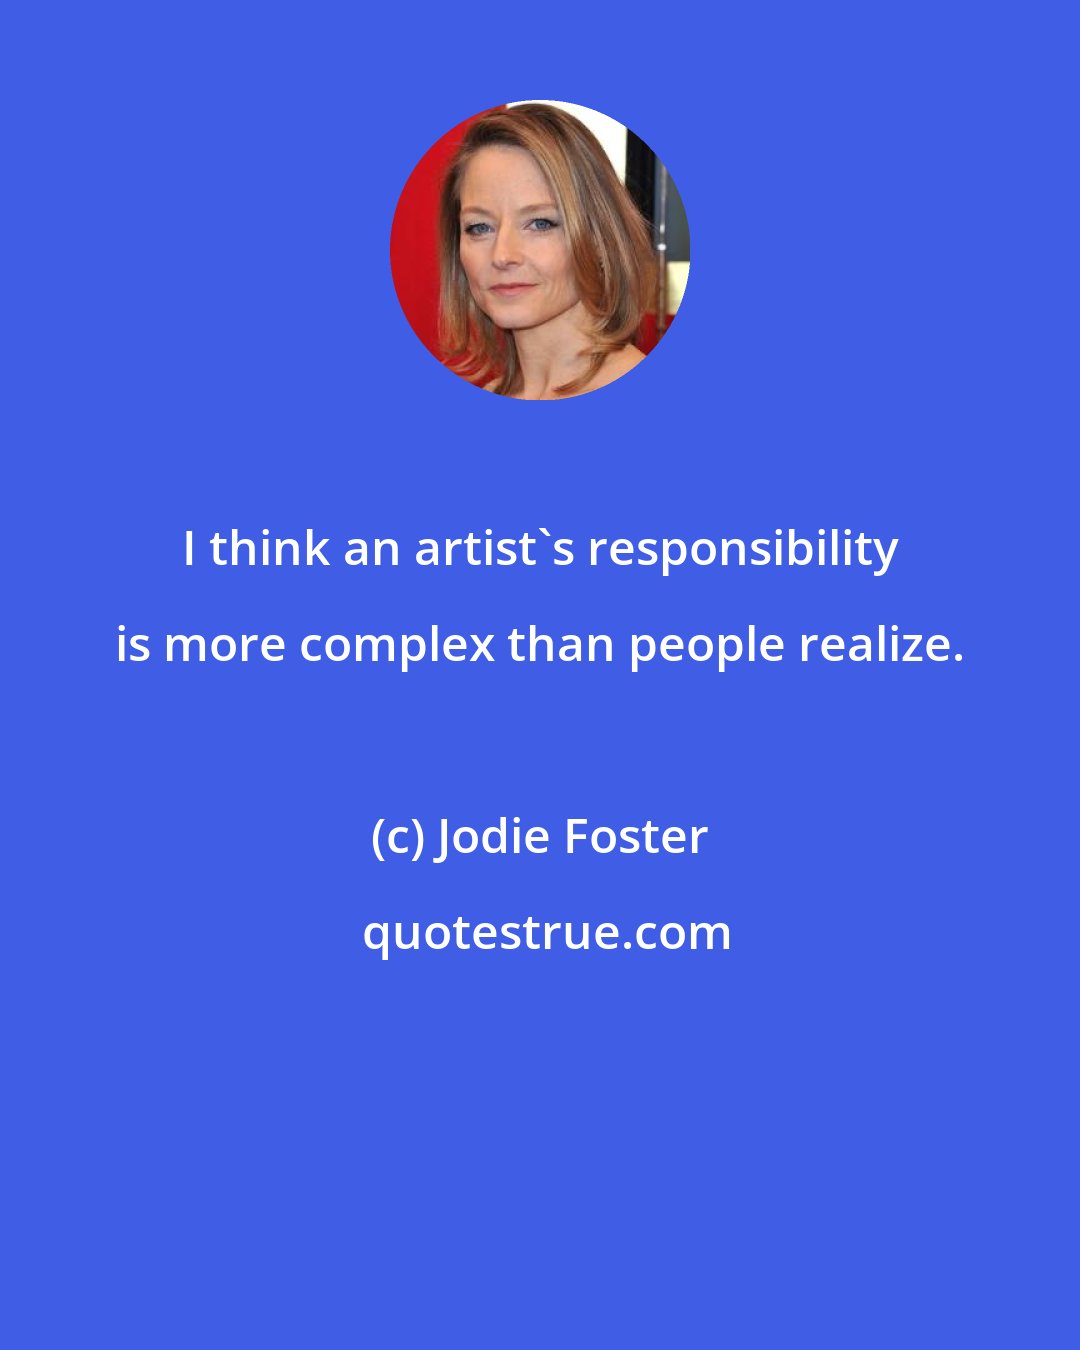 Jodie Foster: I think an artist's responsibility is more complex than people realize.